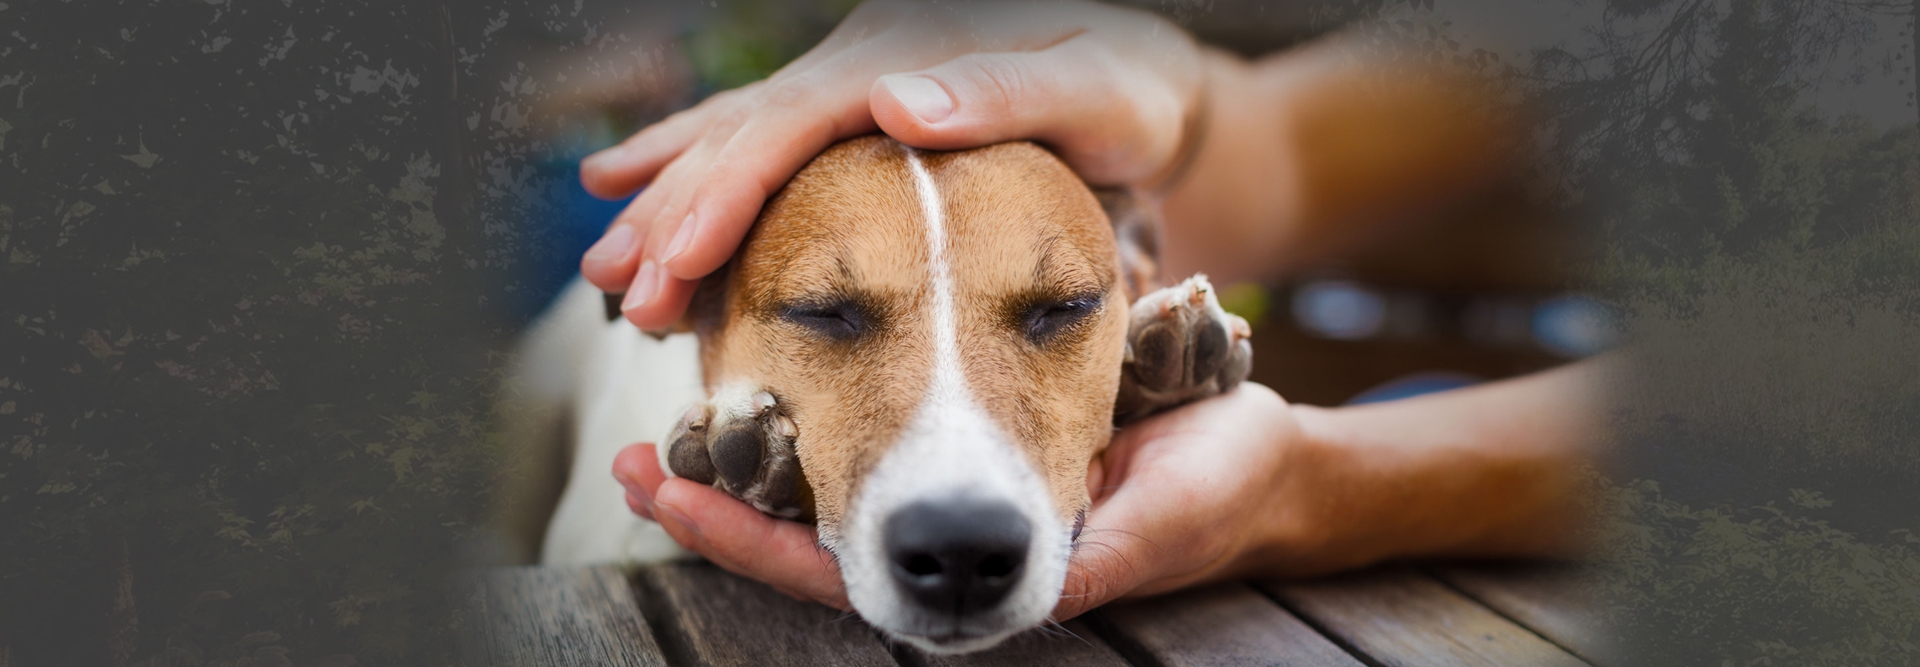 Energy Healing for Dogs - Ancient Techniques that Work Today - Animal Energy Healing Online Training Course